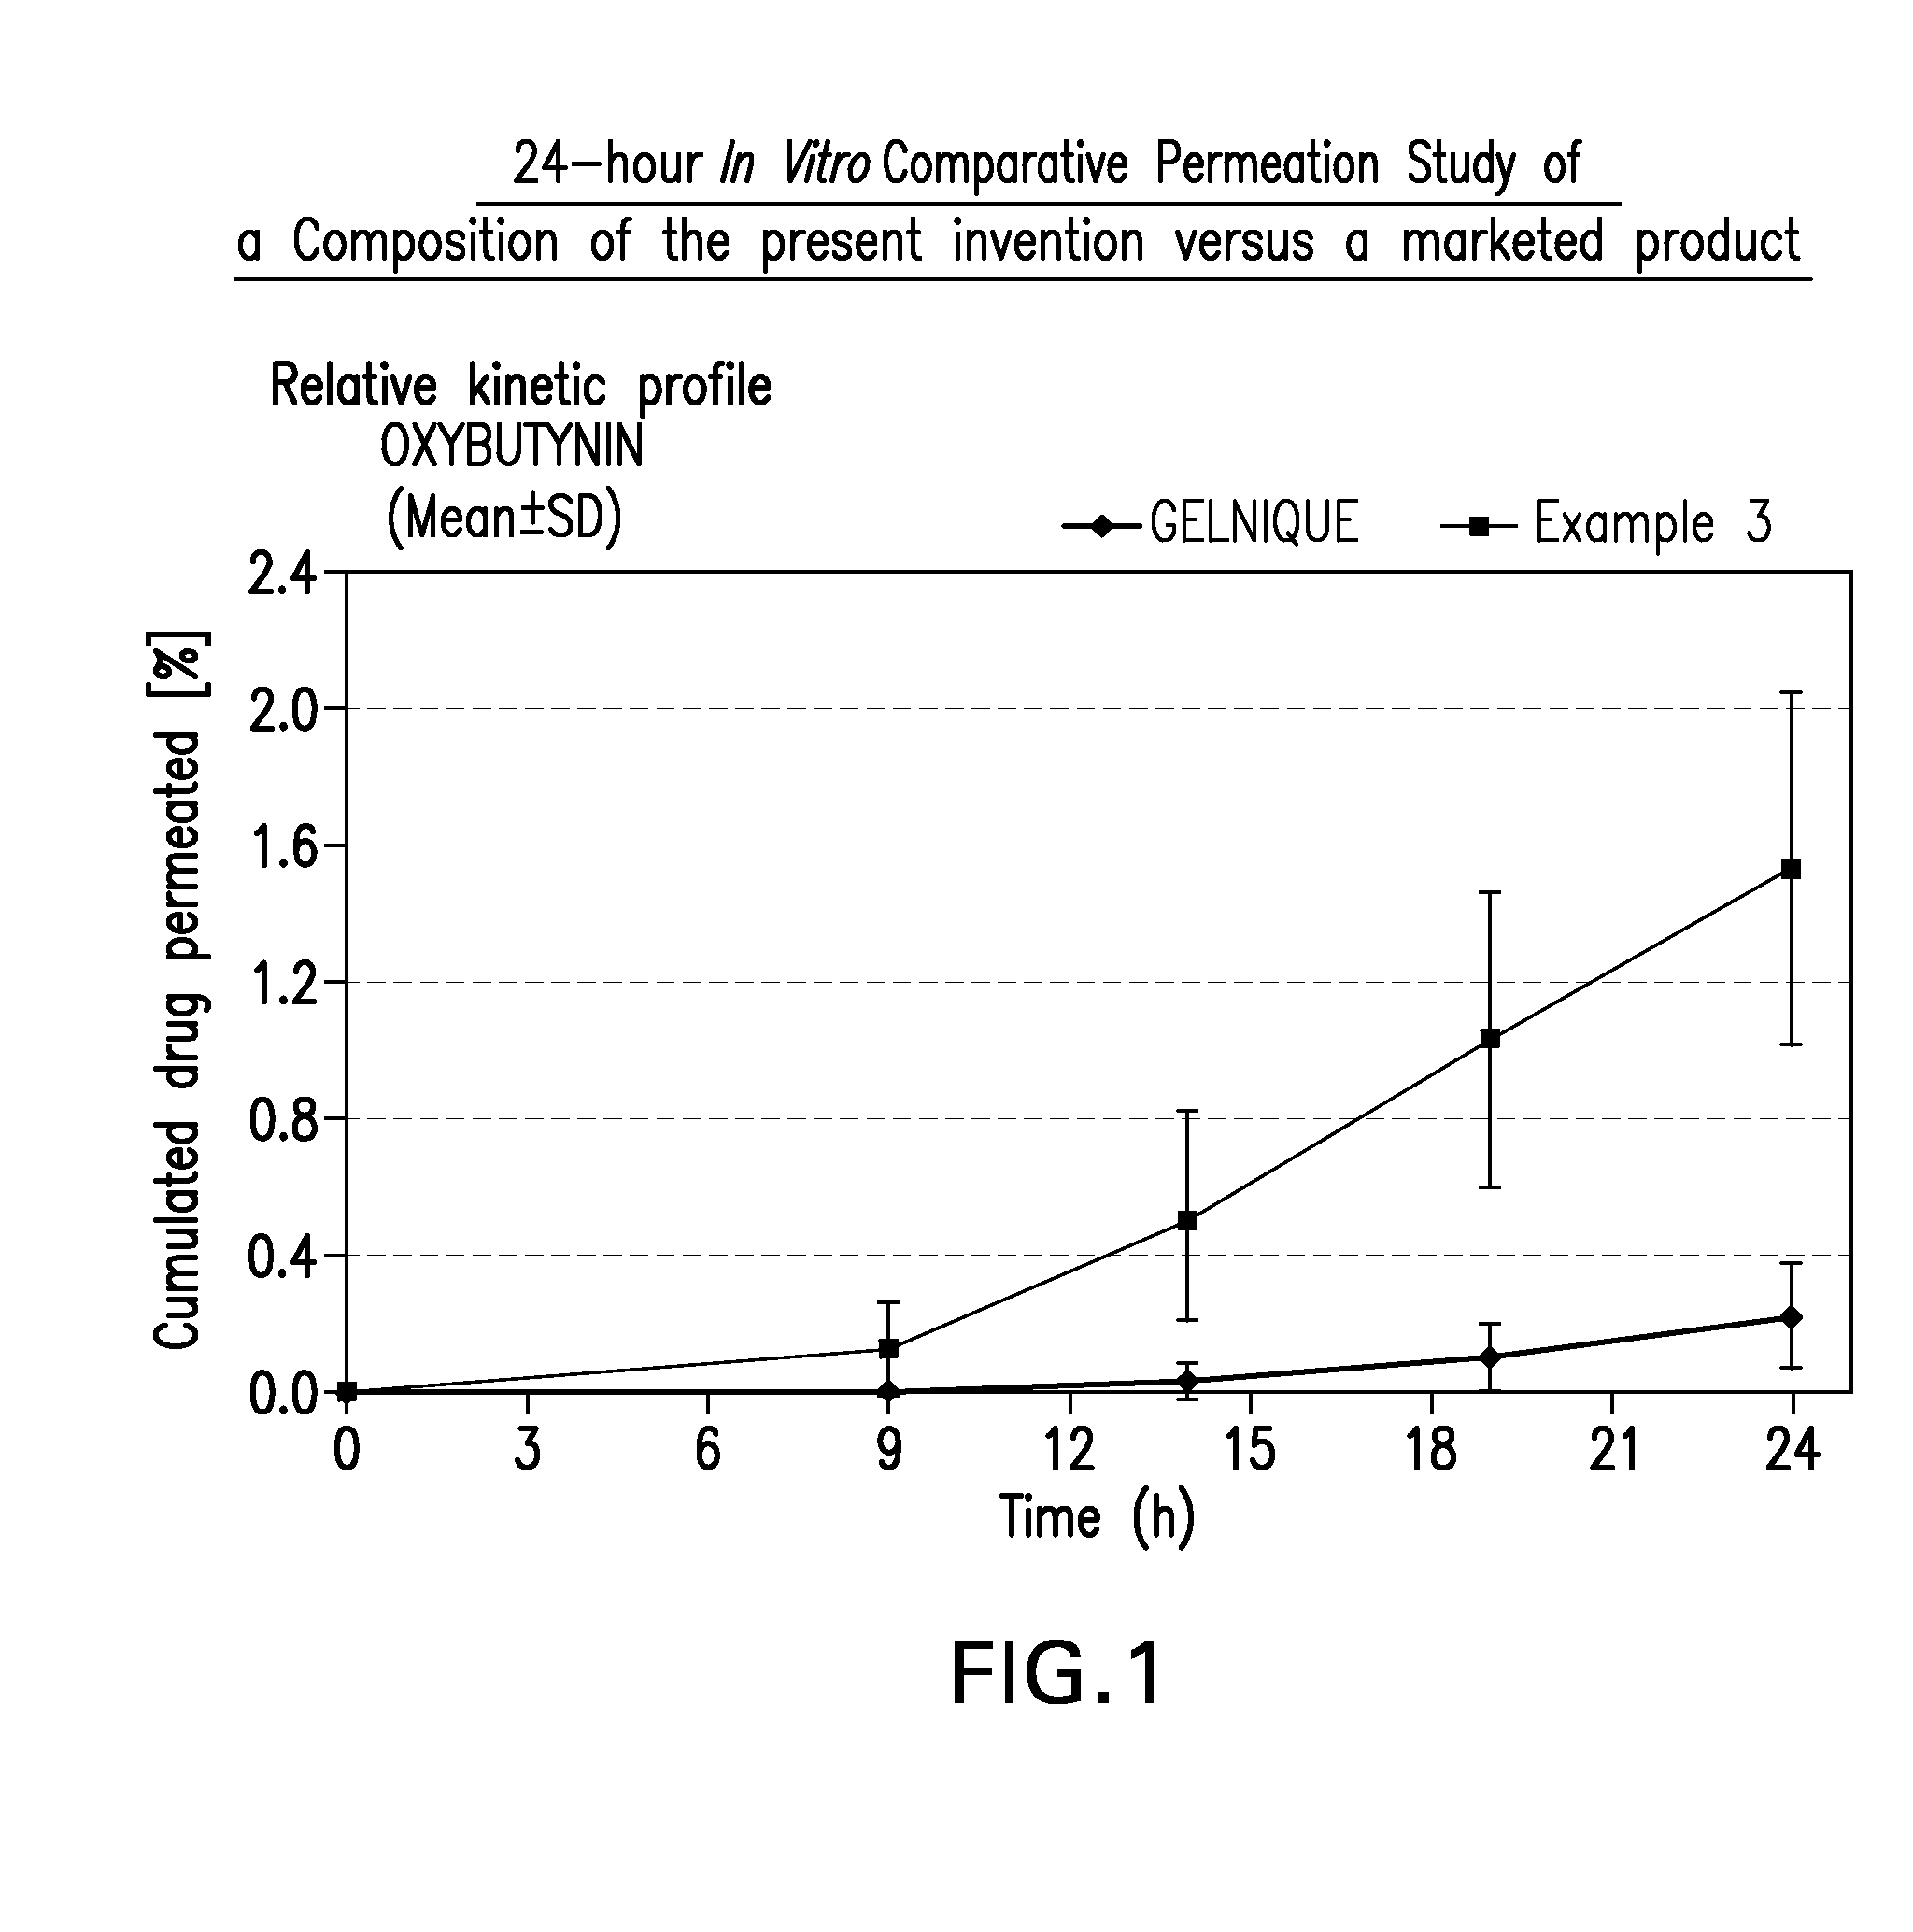 Transdermal compositions for anticholinergic agents